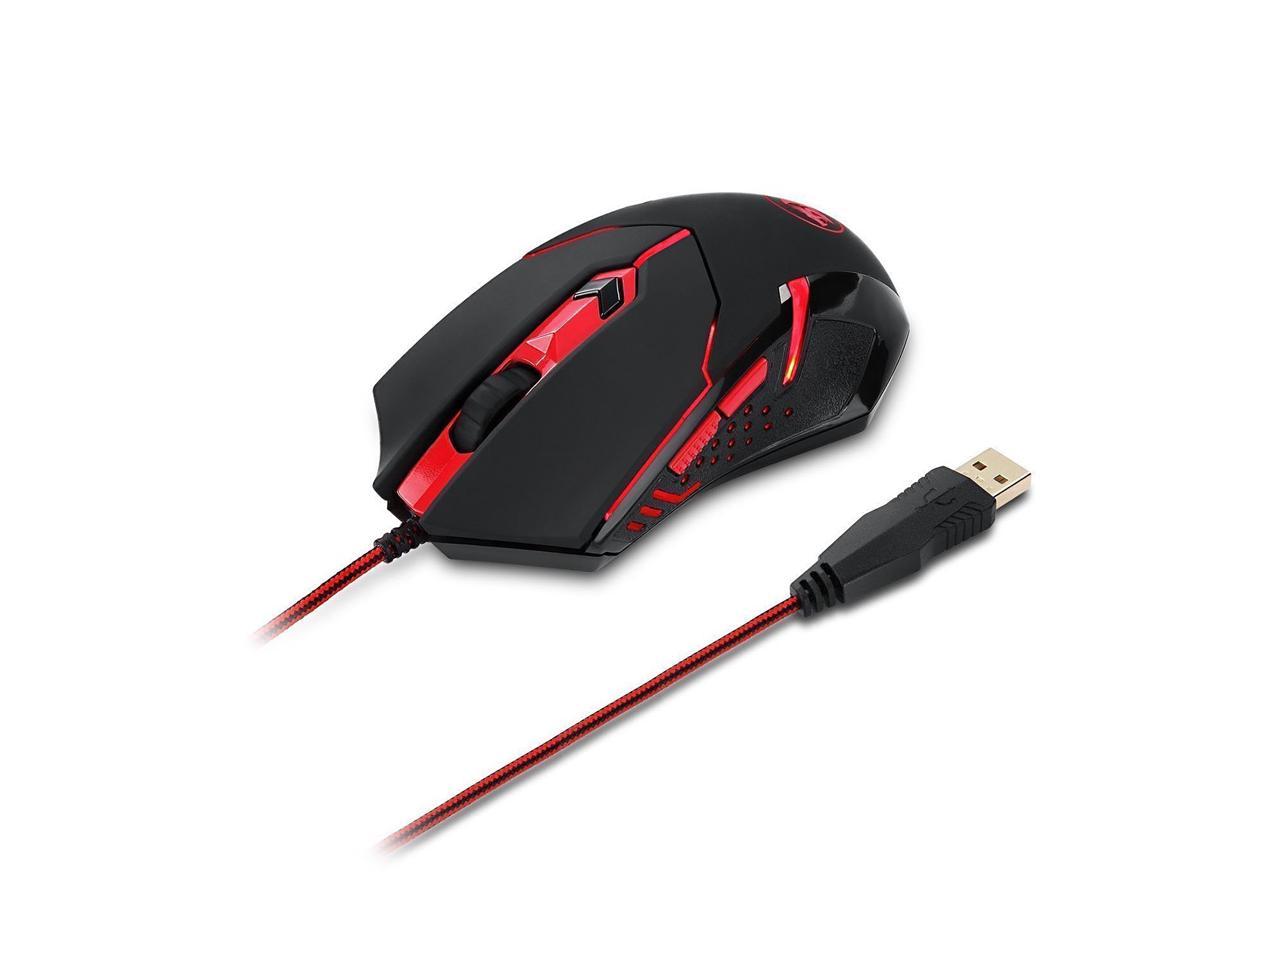 Huangyongchun Gaming Mouse Wired LED 2400 DPI 6 Buttons Ergonomic Gaming Mouse for PC 4 Style Can be Choose Color : Ghostly Black E-Commerce Edition 